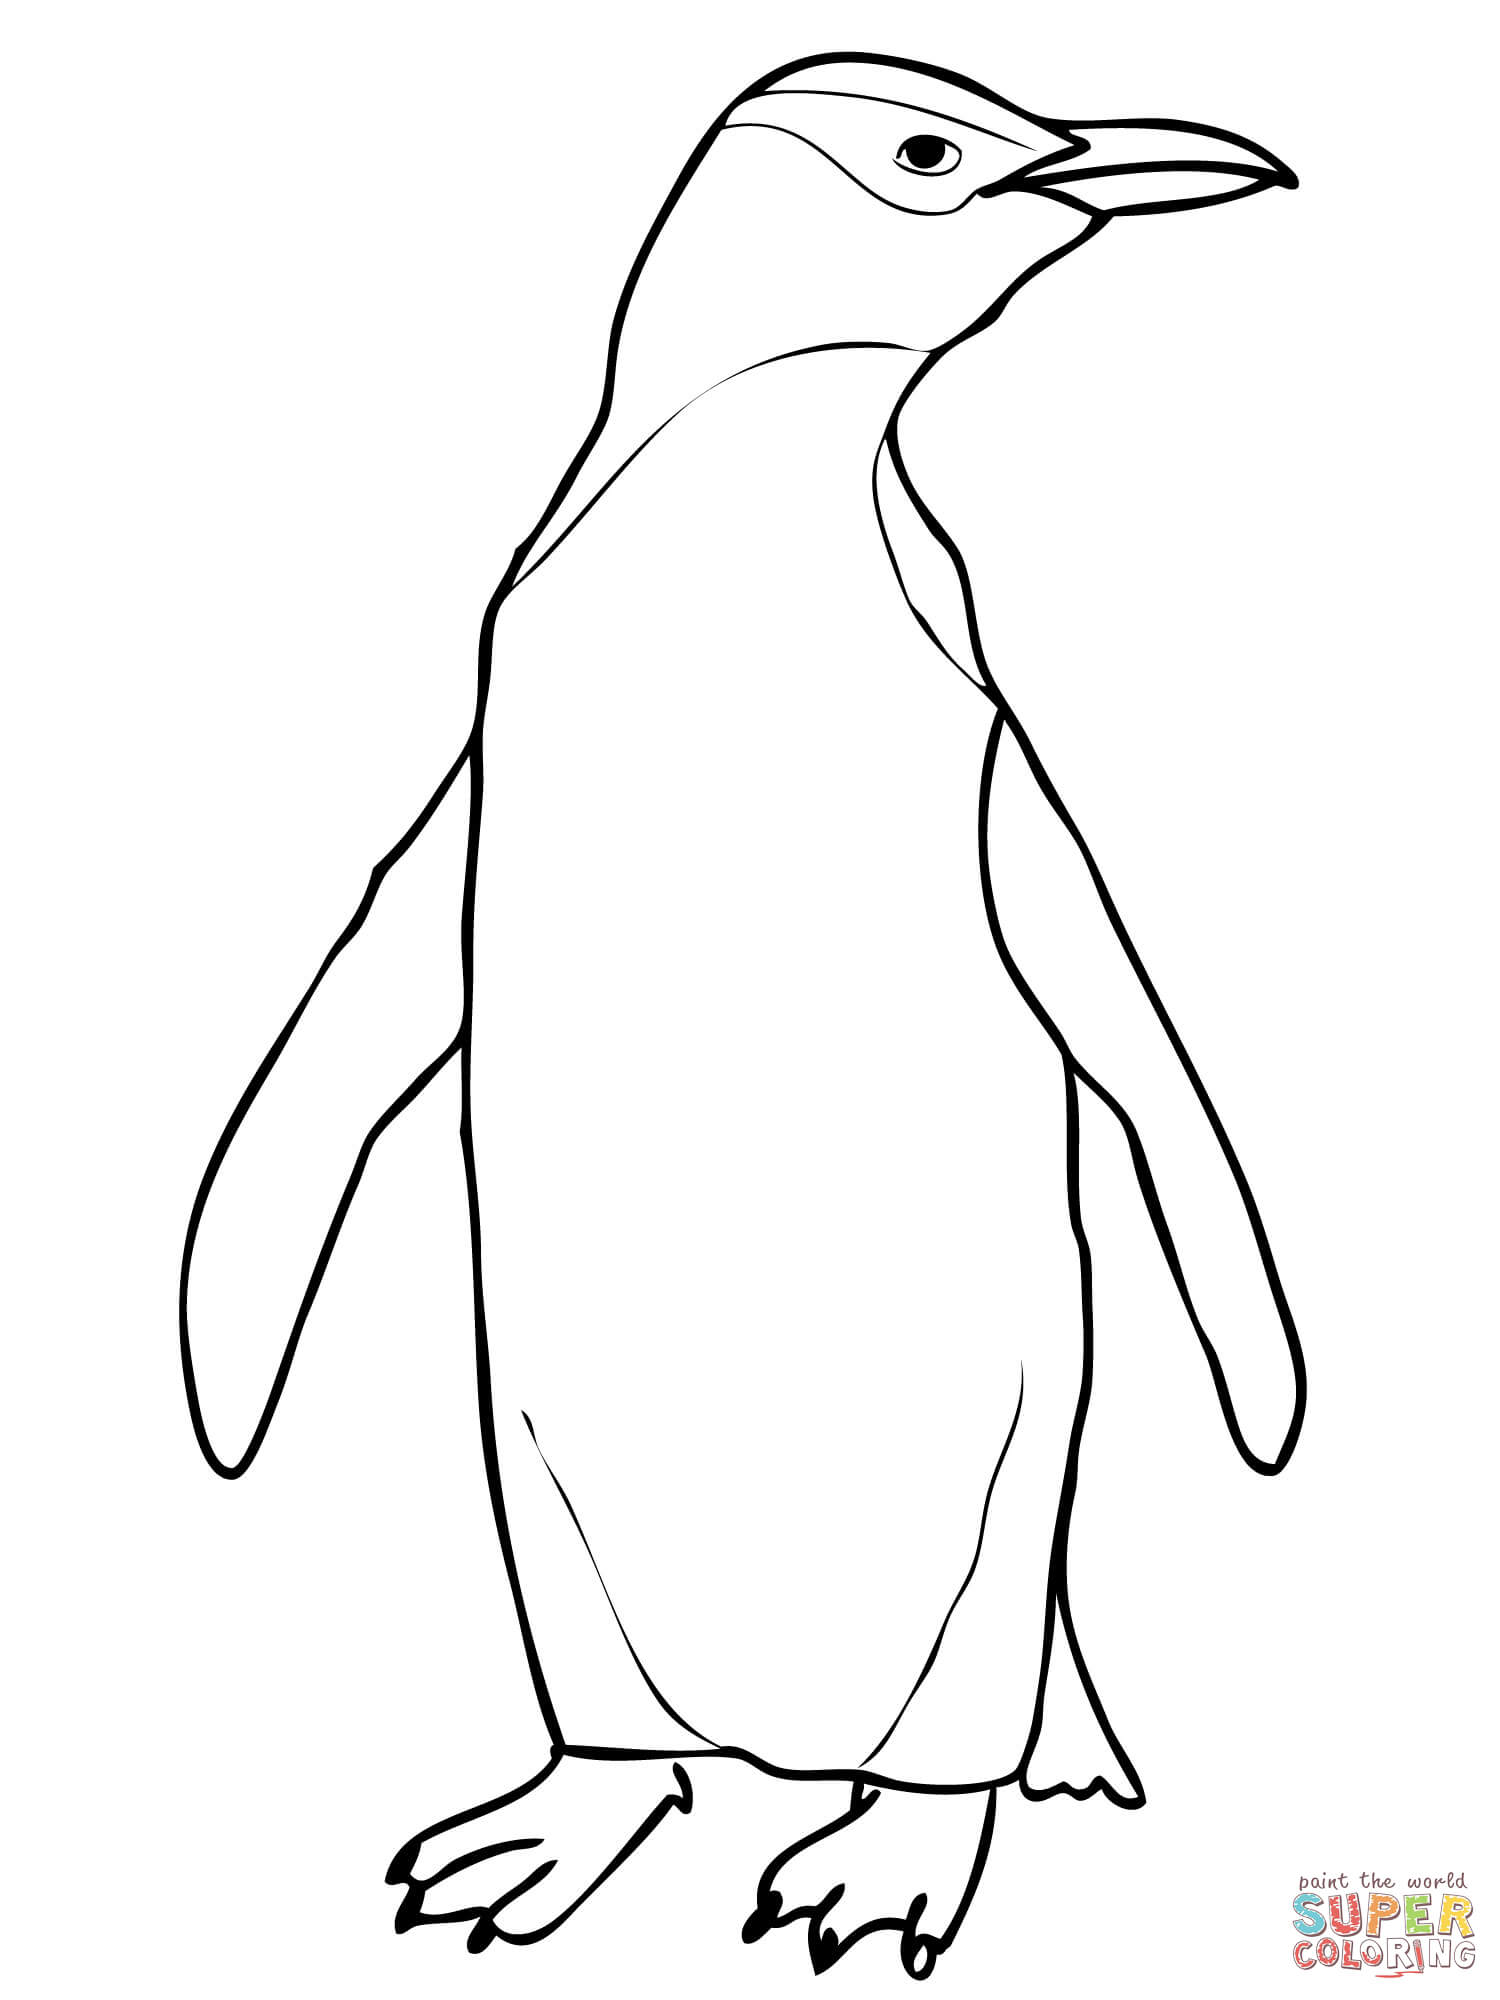 Hoiho Yellow Eyed Penguin coloring page | Free Printable Coloring ...